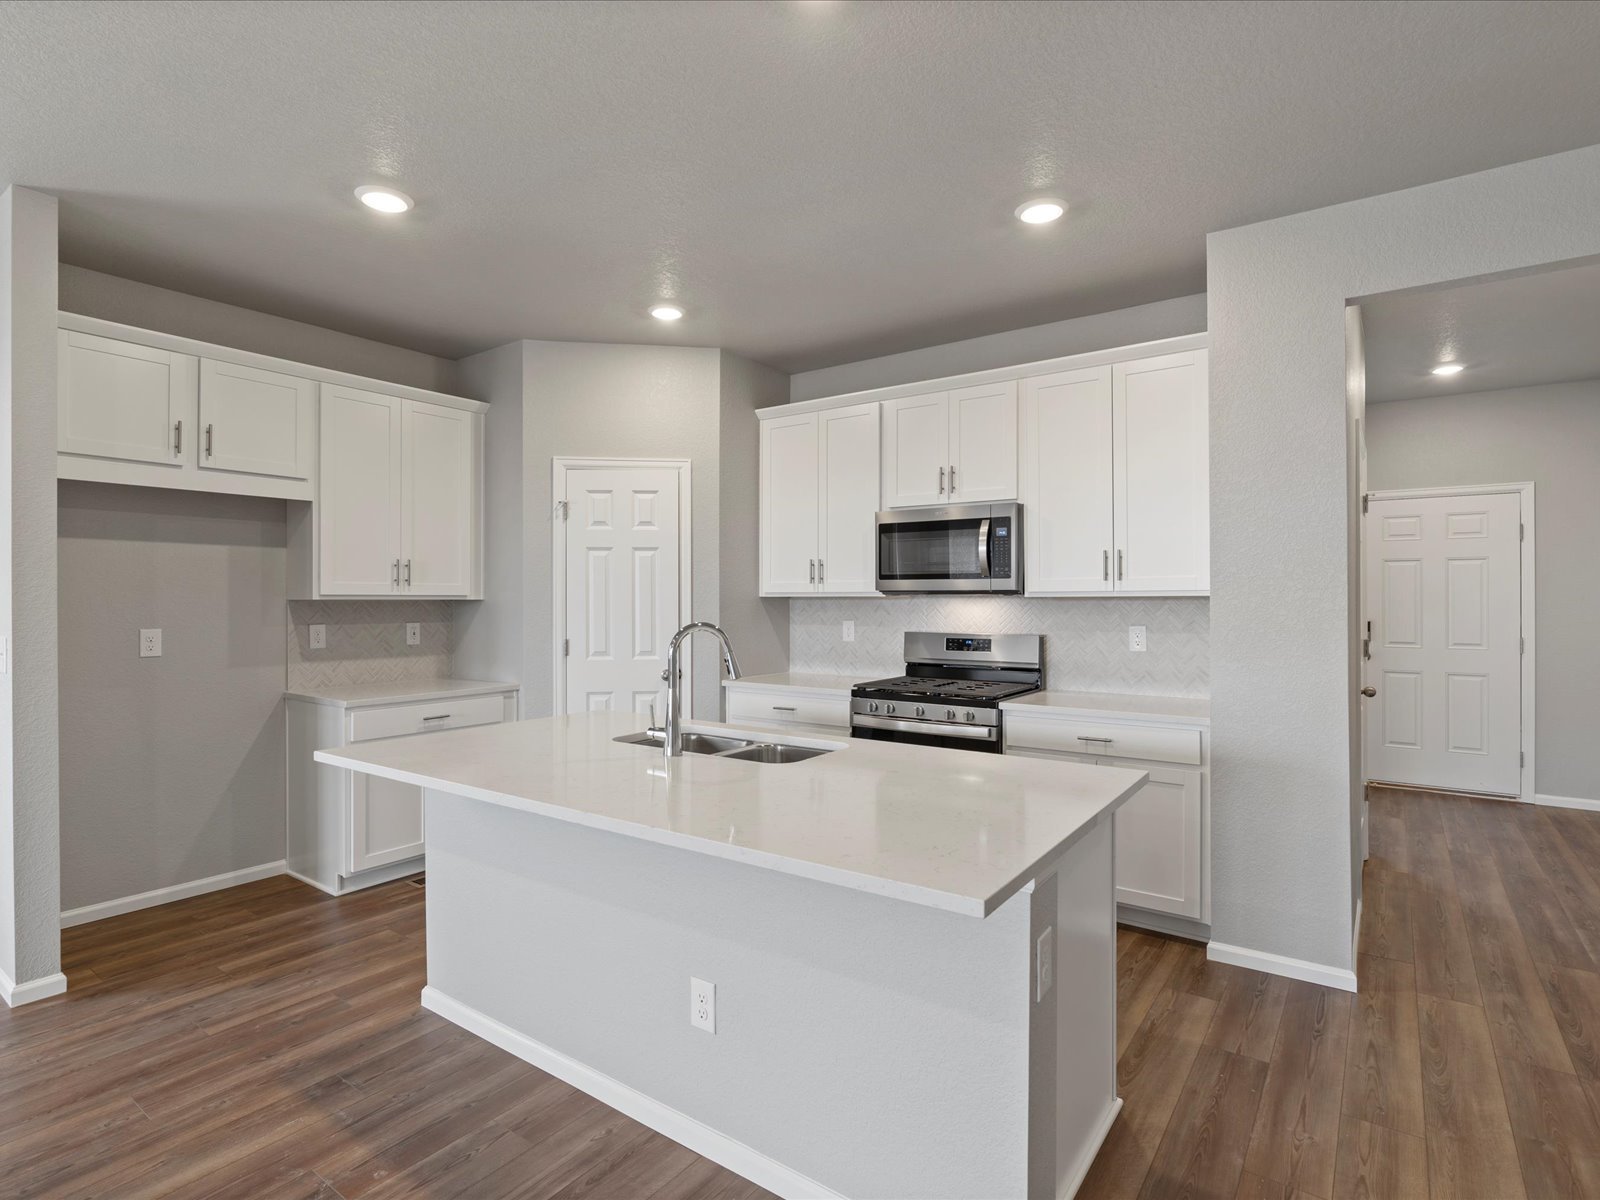 New Homes for Sale in Denver, CO | By Meritage Homes